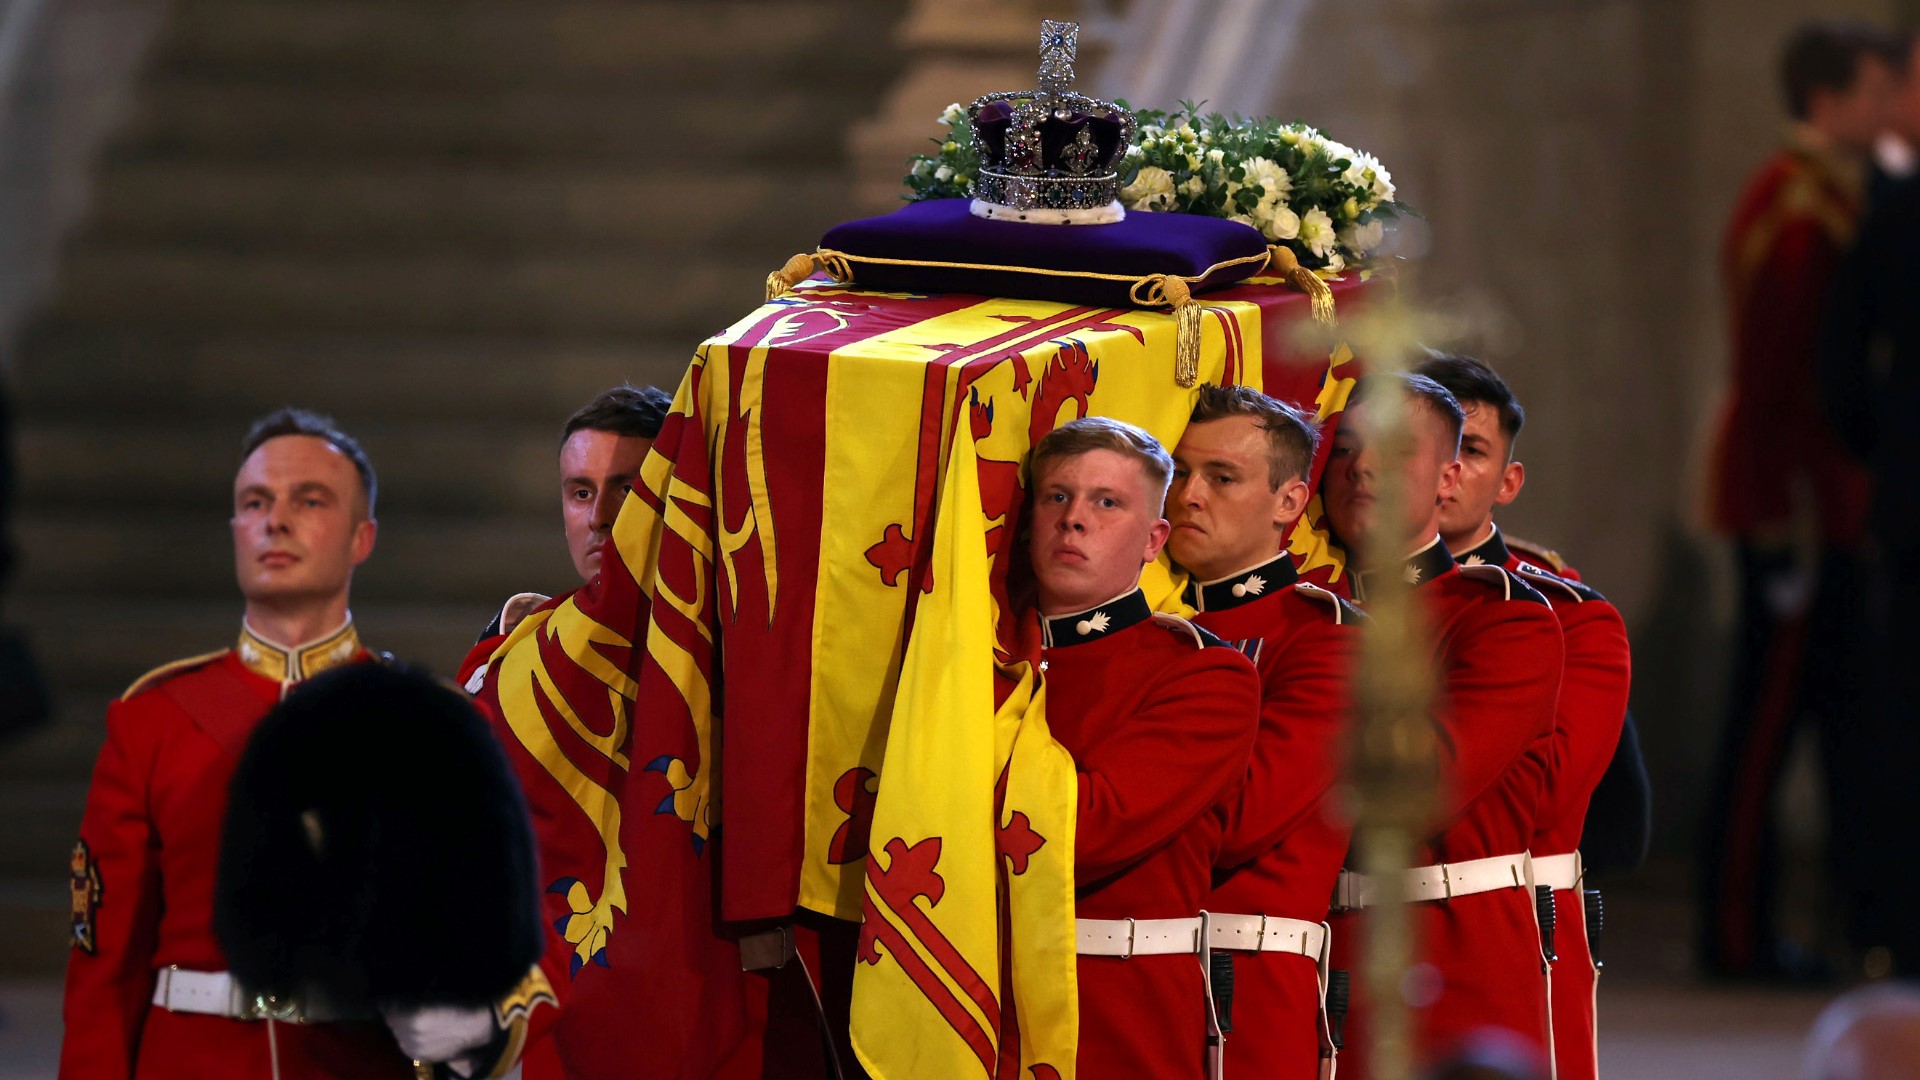 The funeral for Queen Elizabeth II will take place on Monday, September 19.